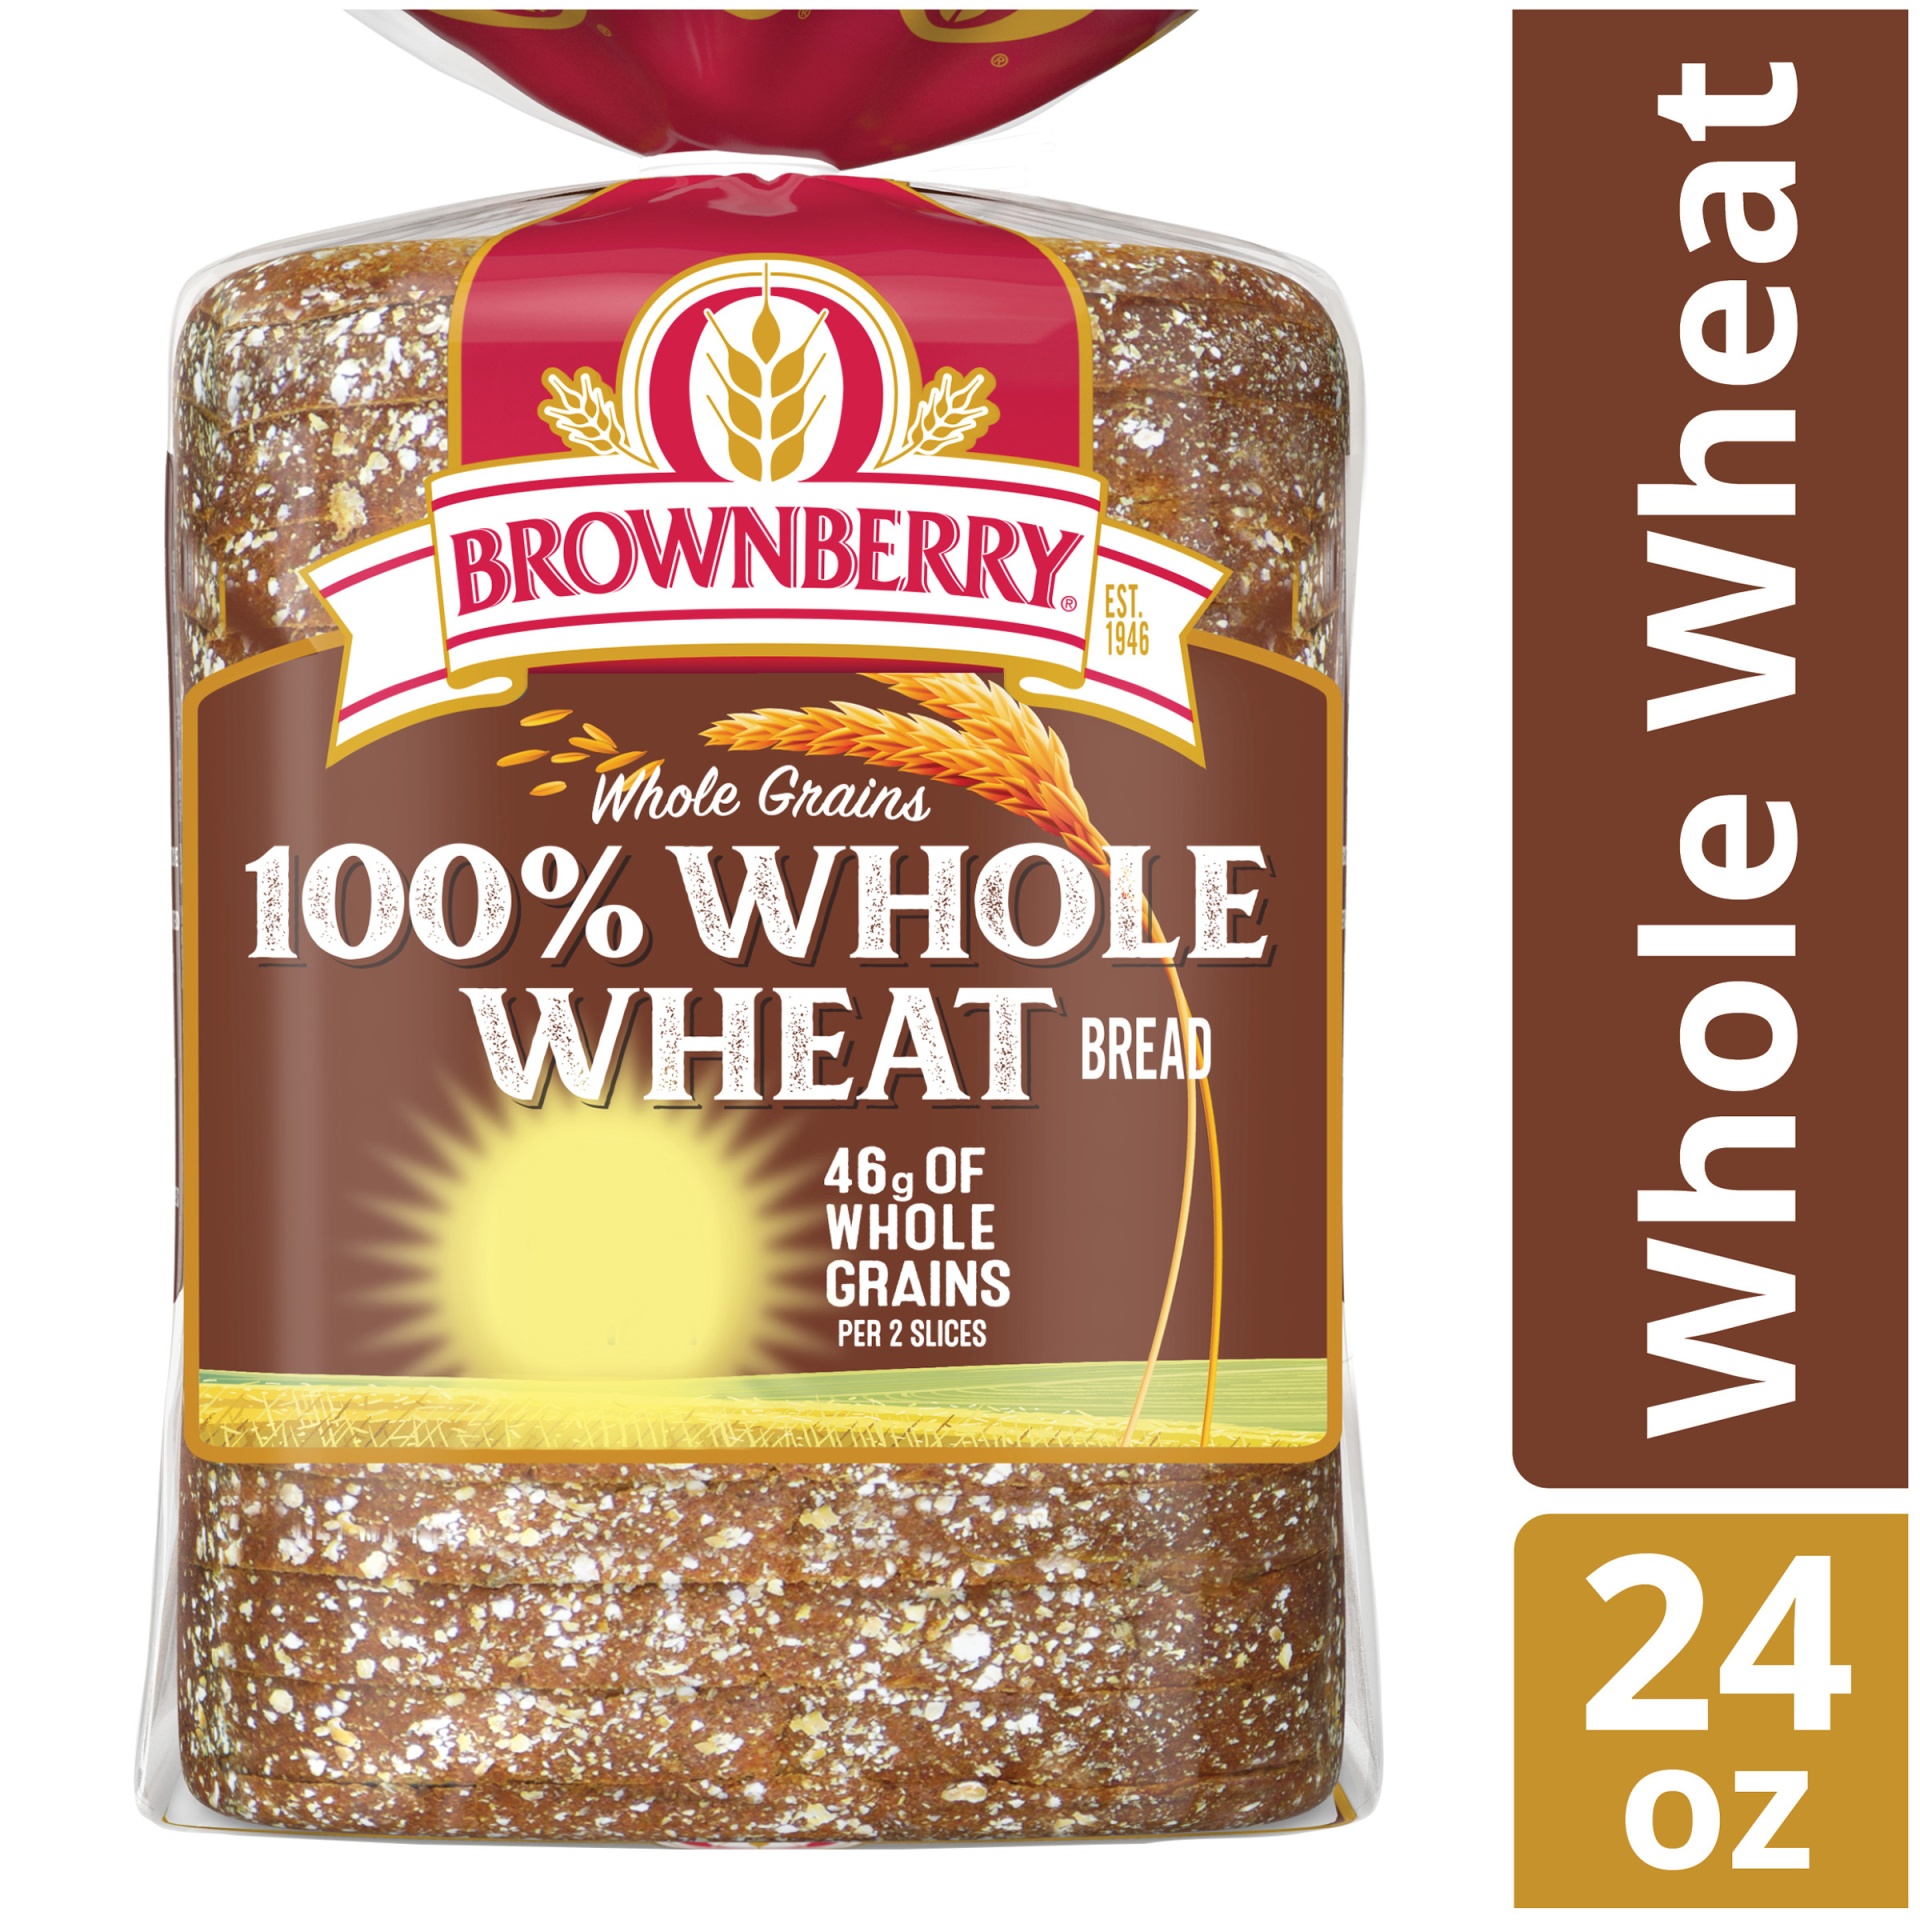 slide 1 of 1, Brownberry Whole Grains 100% Whole Wheat Bread, 24 oz